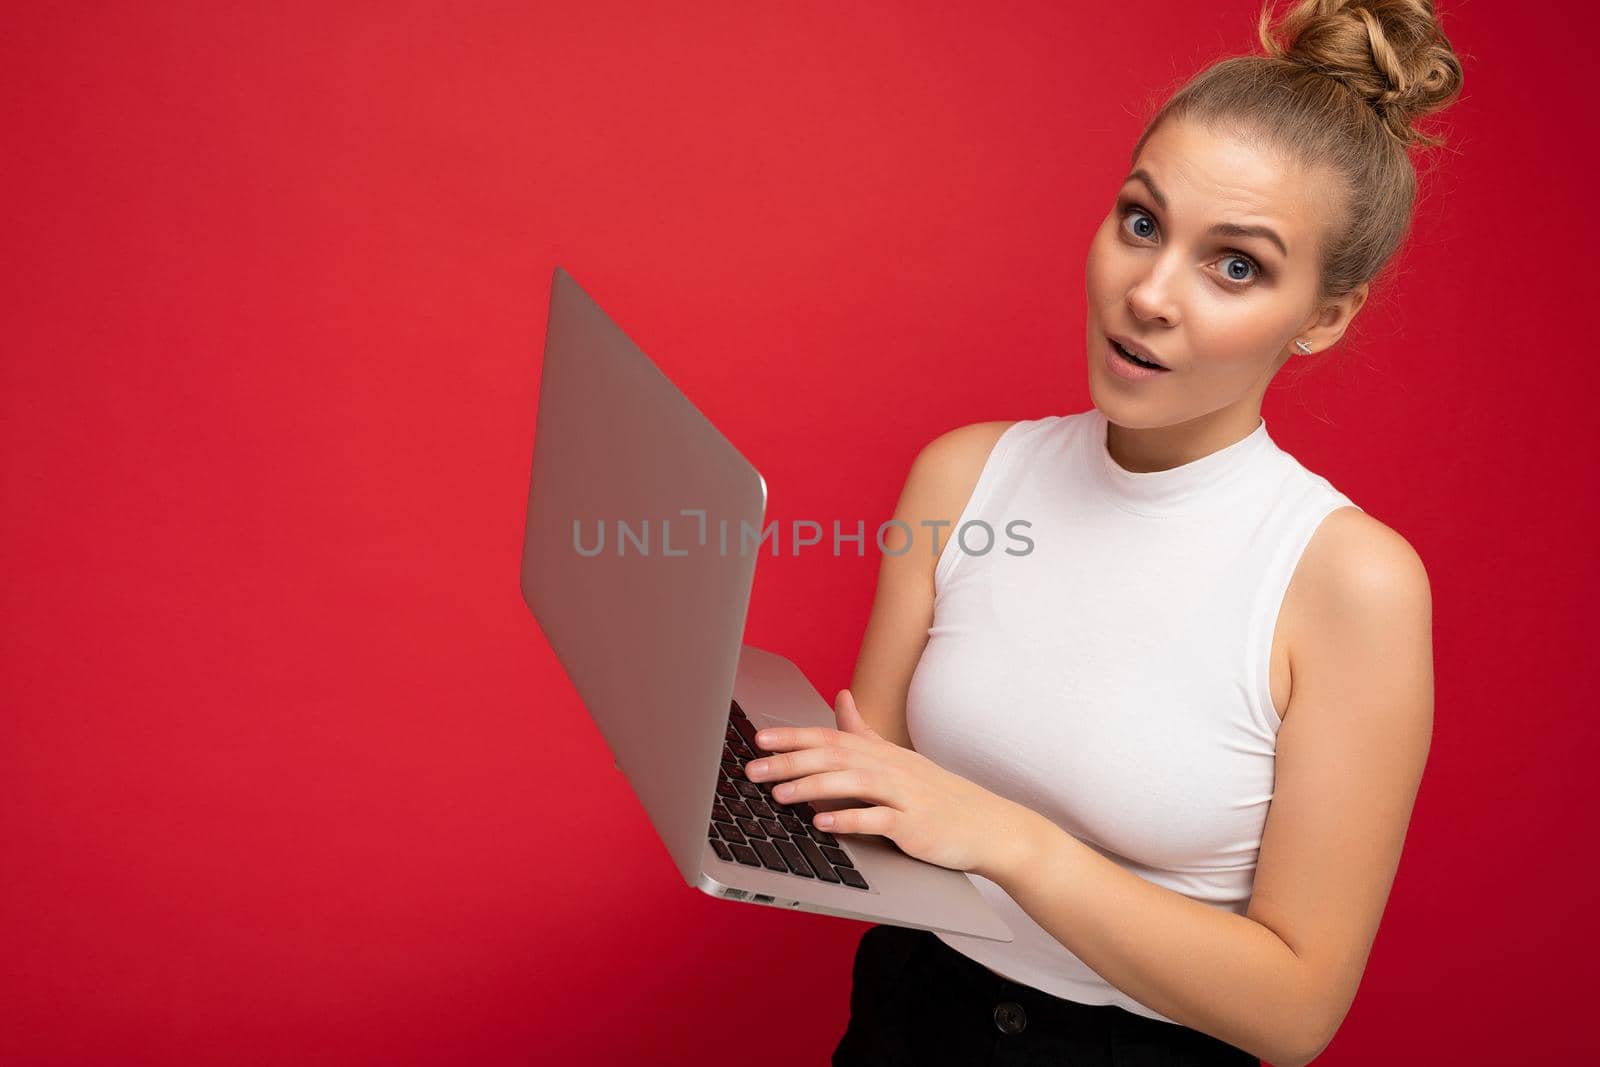 Side profile photo shot of beautiful asking amazed surprised blond young woman with gathered hair with open mouth wearing white t-shirt holding computer laptop typing on keyboard looking at camera isolated over red wall background.